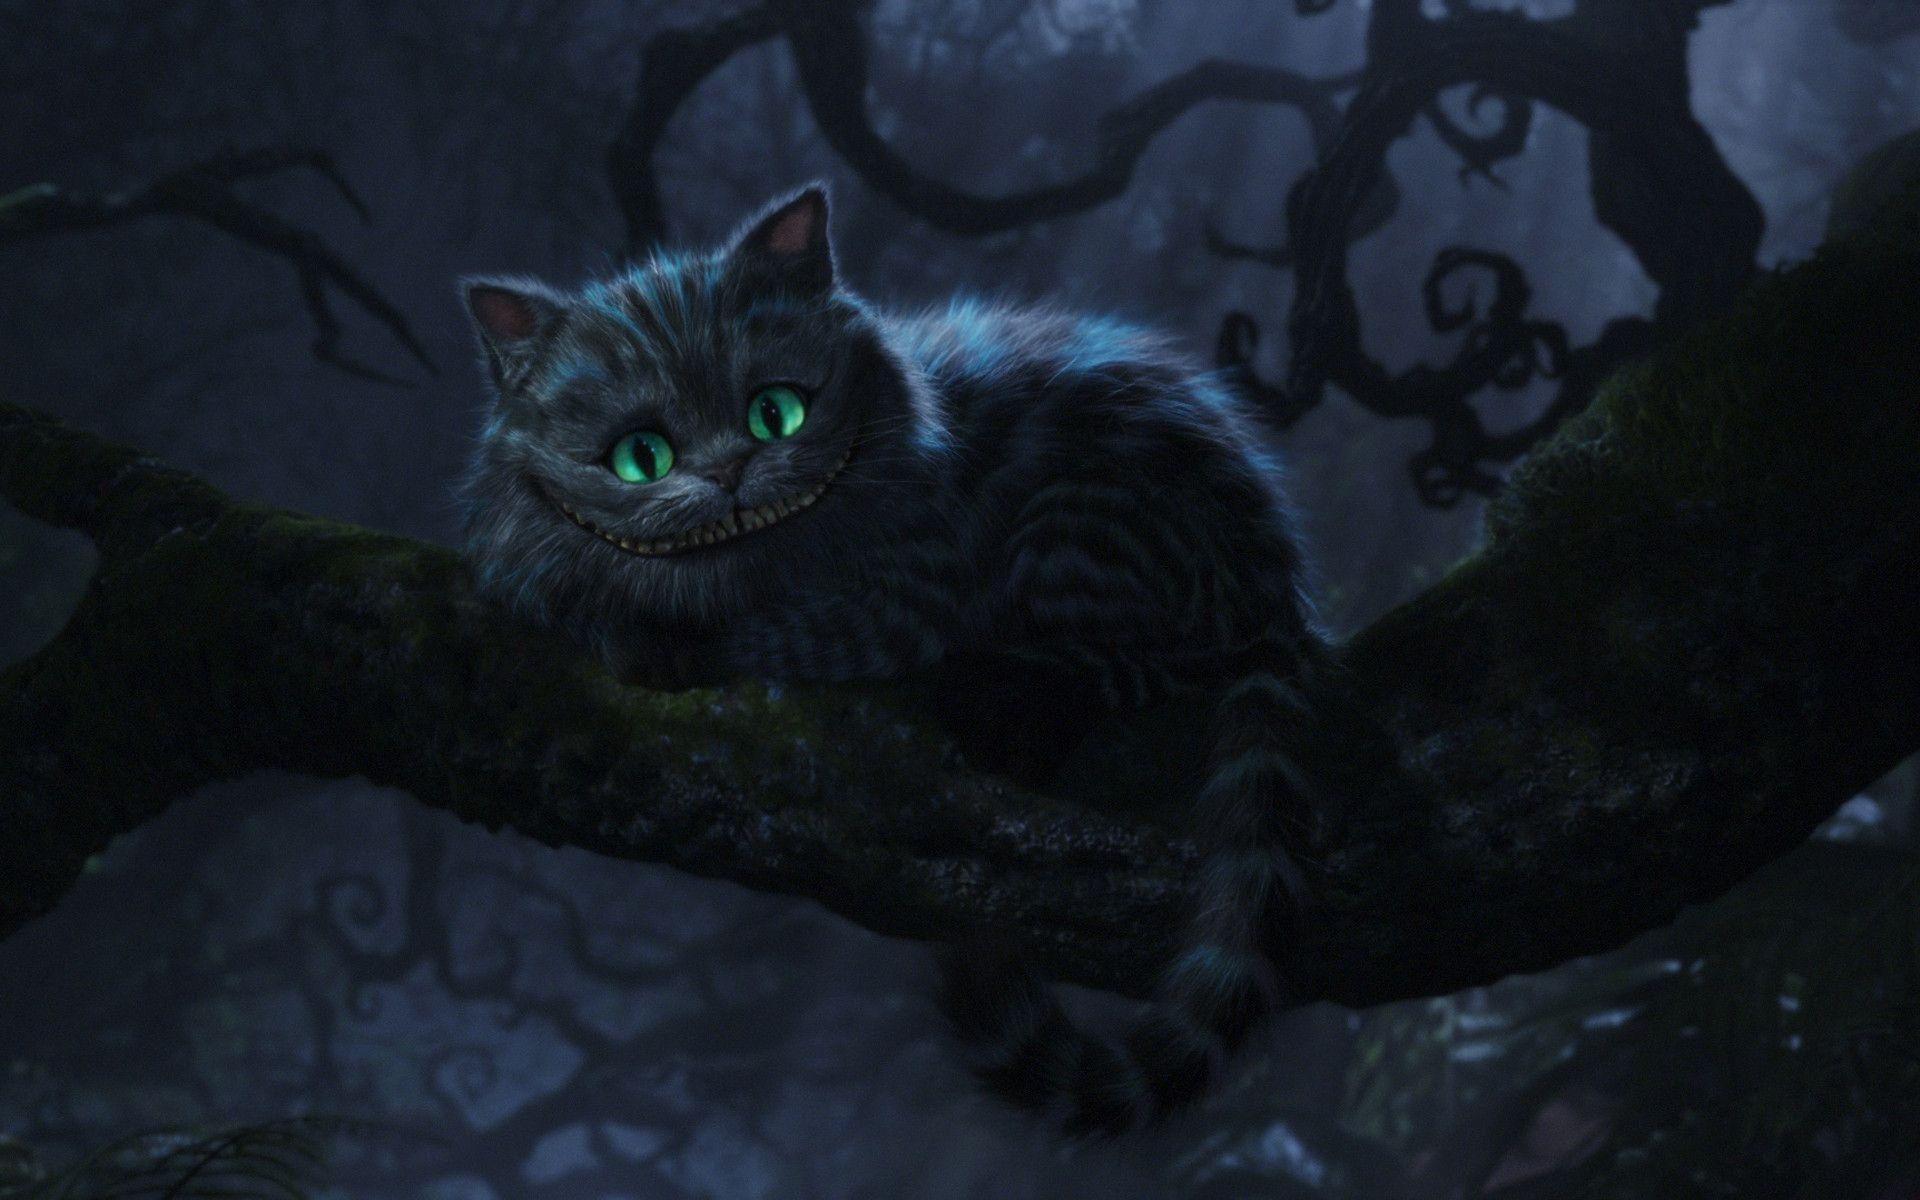 Cheshire Cat: Disney's character, A permanent smile on his face, can disappear at will. 1920x1200 HD Wallpaper.